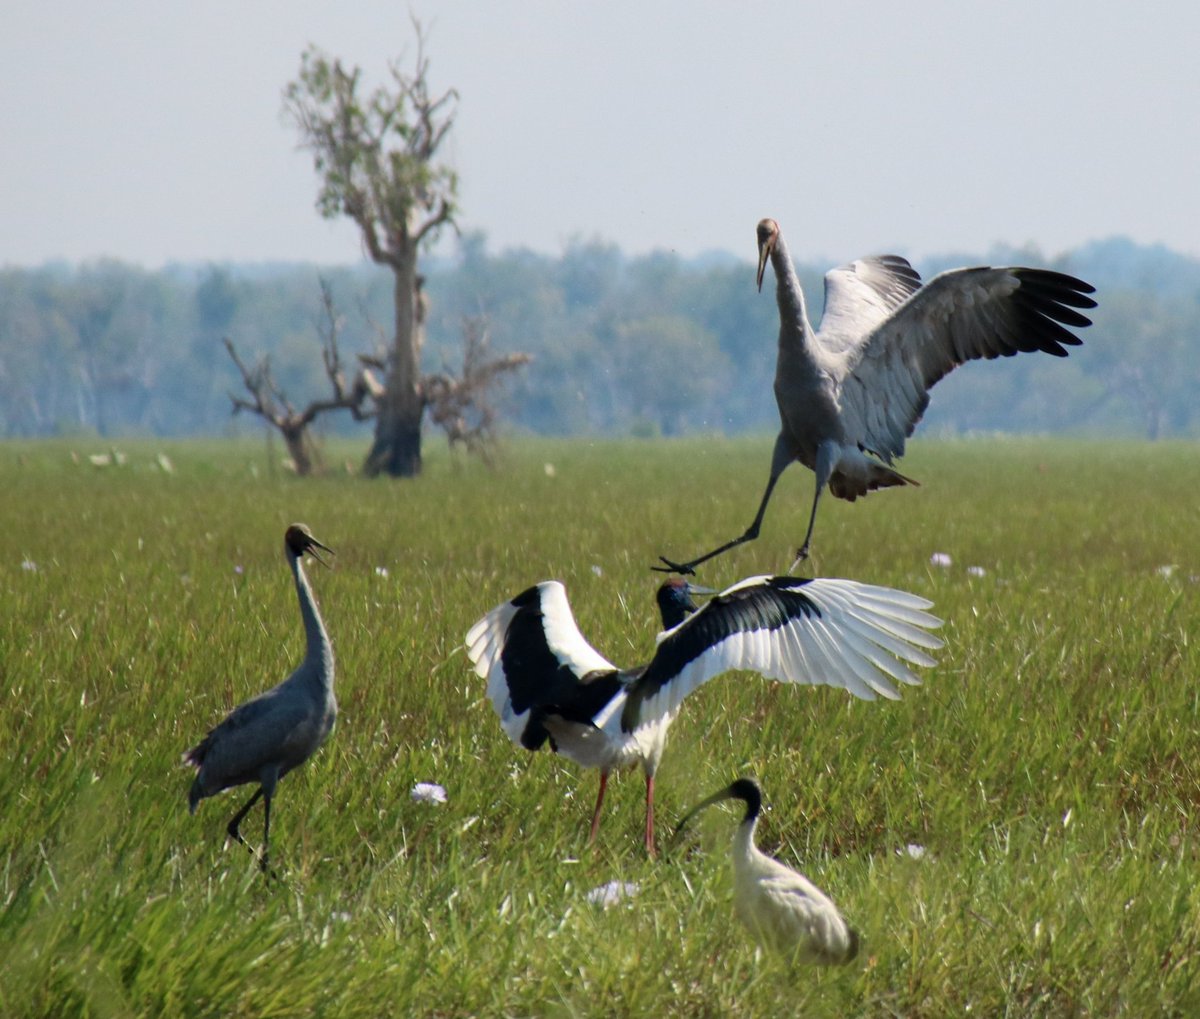 @funtravelchat @travthroughlife @CharlesMcCool @FunInFairfax @HeidiSiefkas @sl2016_sl @RickGriffin @akenyon_ @mirandasyndrome @AdventurePretty @Adventuringgal @twodriftersxo We were incredibly lucky to witness this dance off between a brolga and a blacknecked stork in Mary River NP last year leaving the brolga victorious! Ibis says #whatever ... only @AusOutbackNT

#funtravelchat #NTaustralia #NorthernTerritory #birding